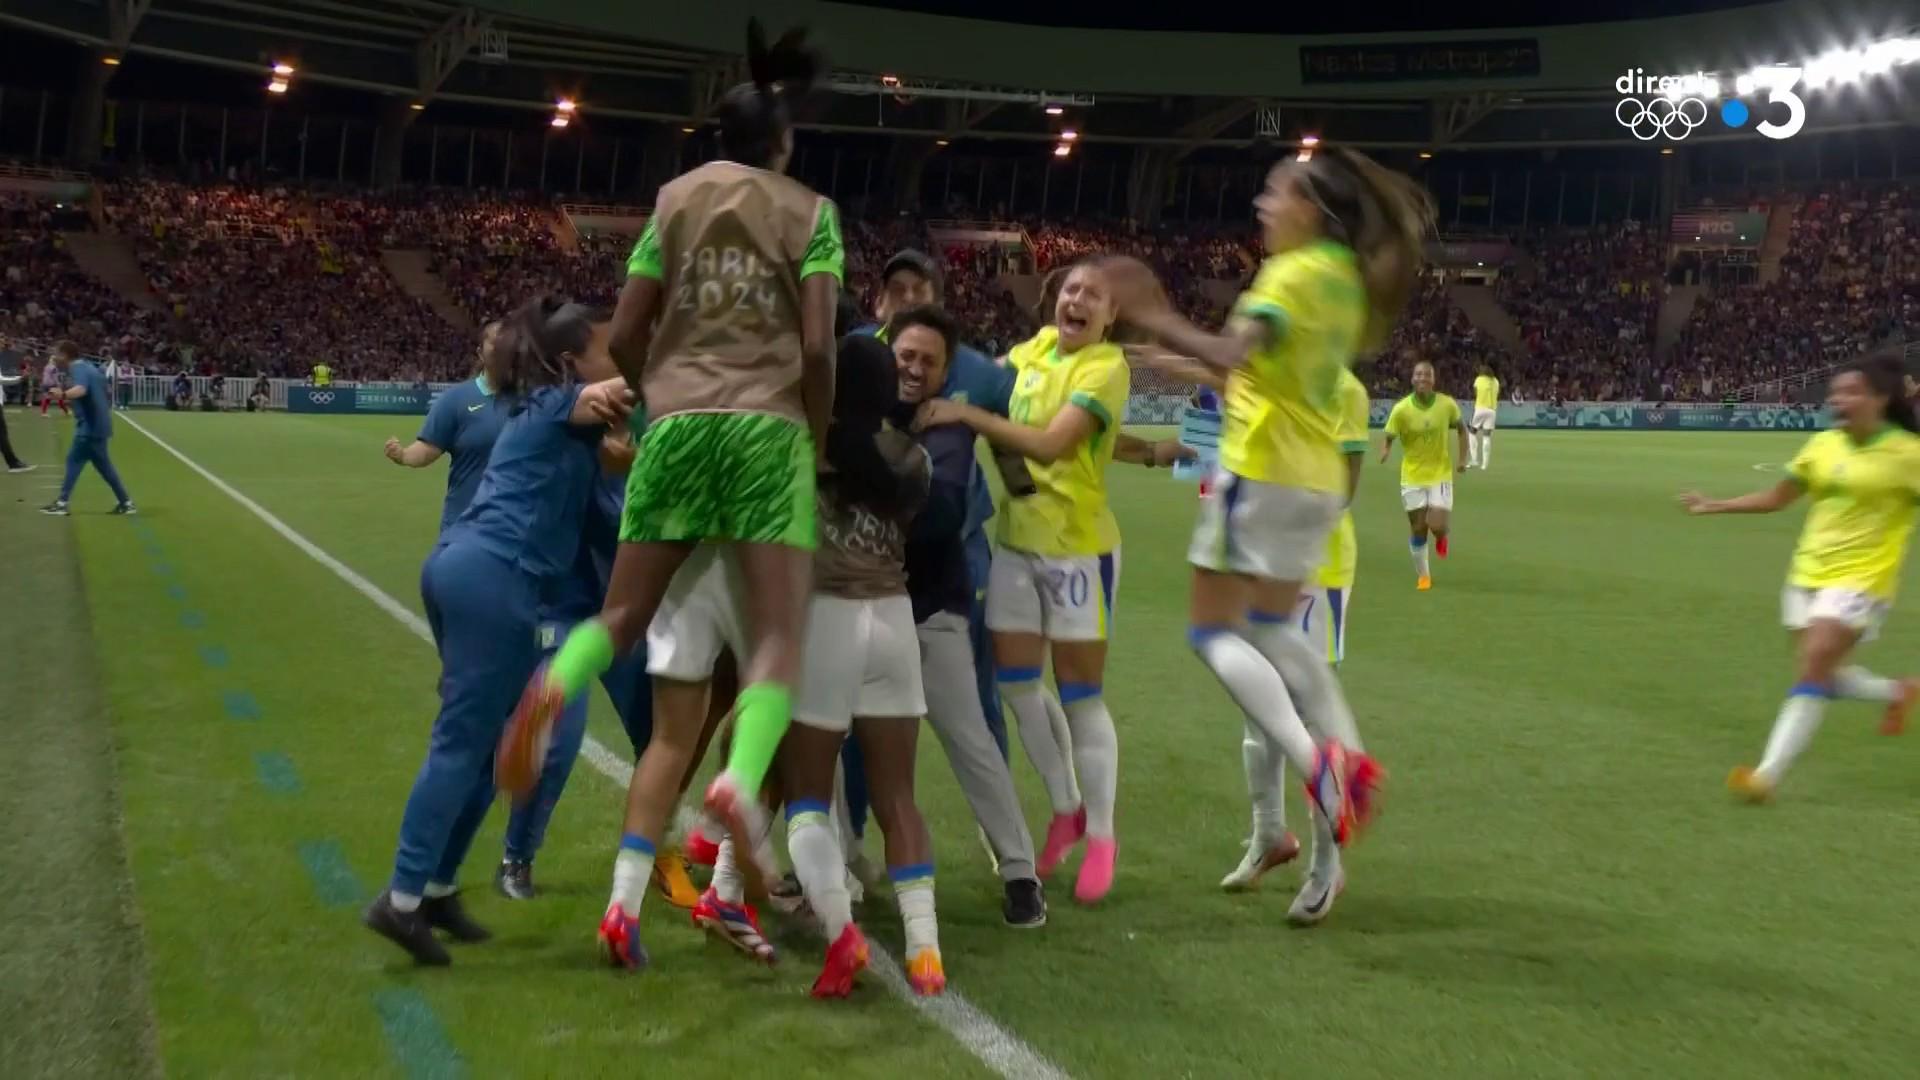 The French team lost to Brazil in the quarter-finals of the women's Olympic football tournament on Saturday, August 3 at the Stade de la Beaujoire in Nantes.